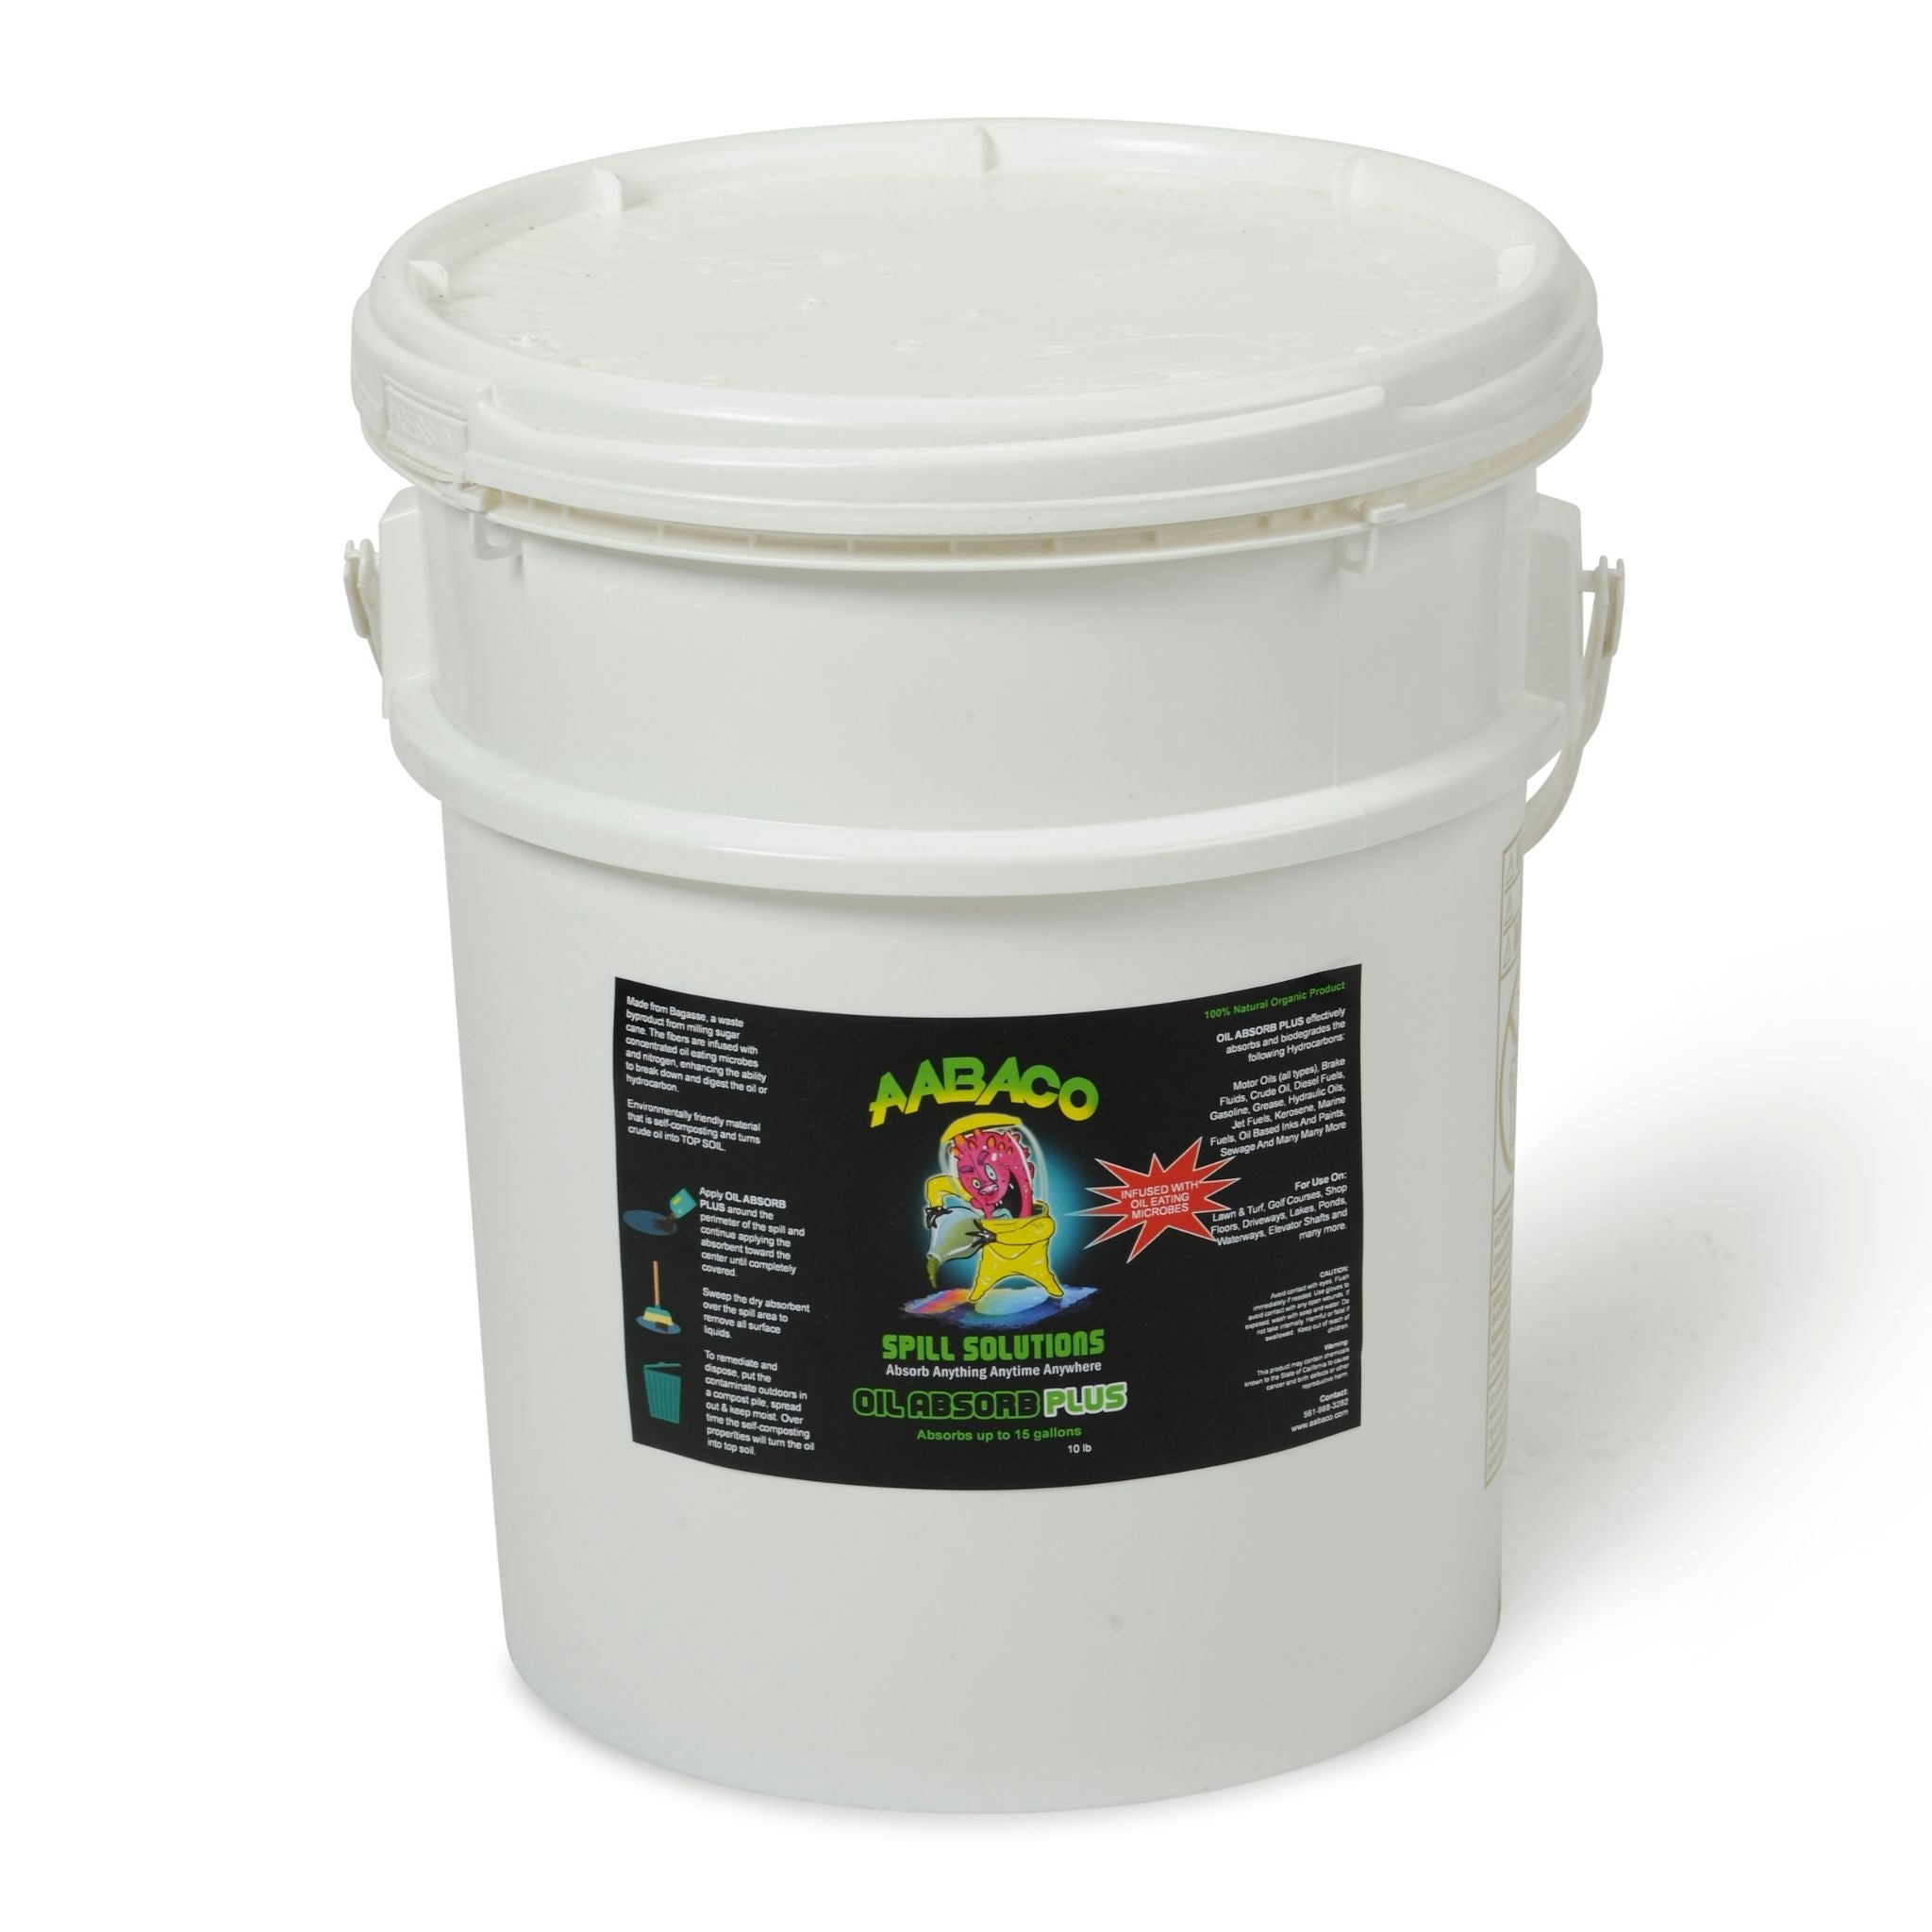 AABACO OIL ONLY SPILL KIT IN DRUM – 25 GALLONS